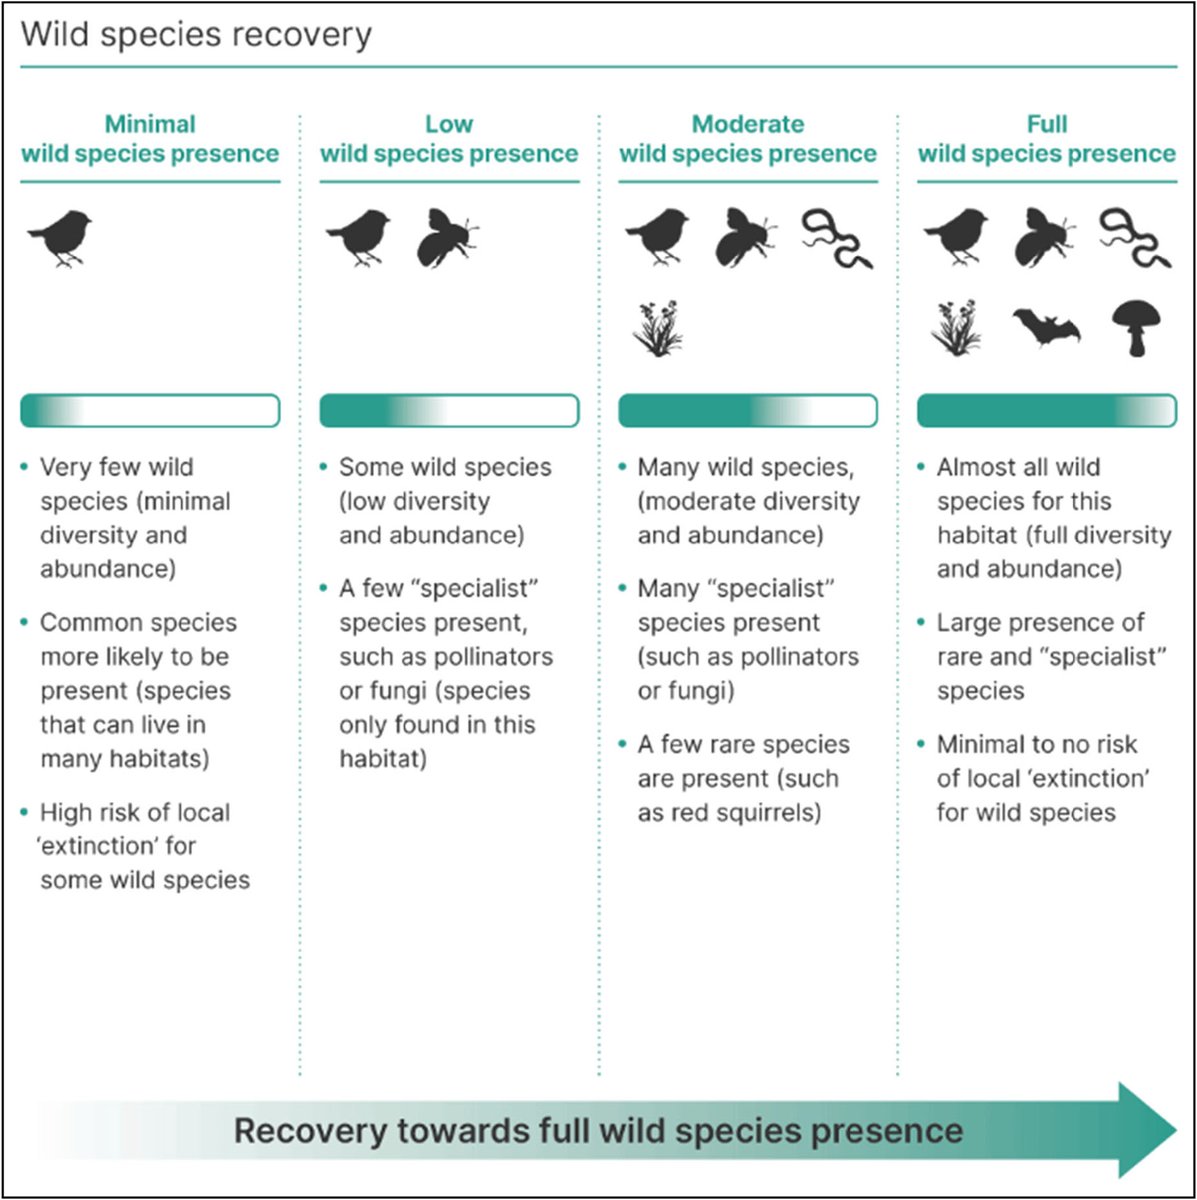 Can biodiversity values be integrated into policy decisions? 🦆📈 A new study argues that the public support for species recovery and habitat improvement in England suggests biodiversity targets should be at the forefront of policy decisions. doi.org/10.1002/pan3.1…